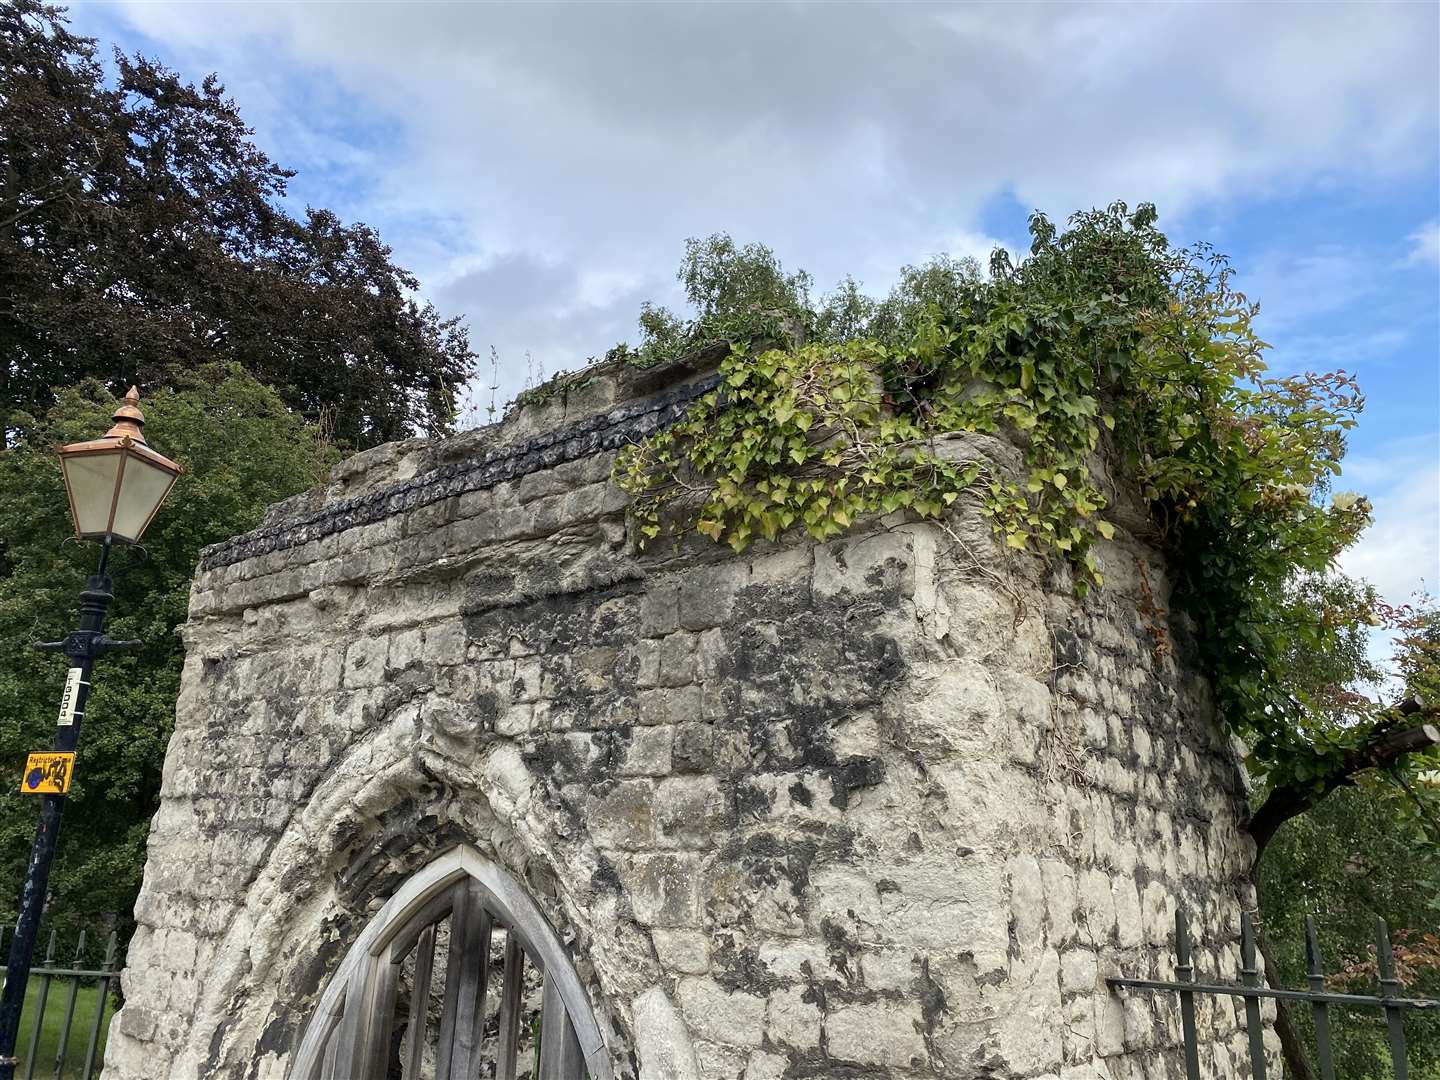 Crumbling mortar holding masonry in place was detected during a survey in 2017 and stones were removed to make the structure safe